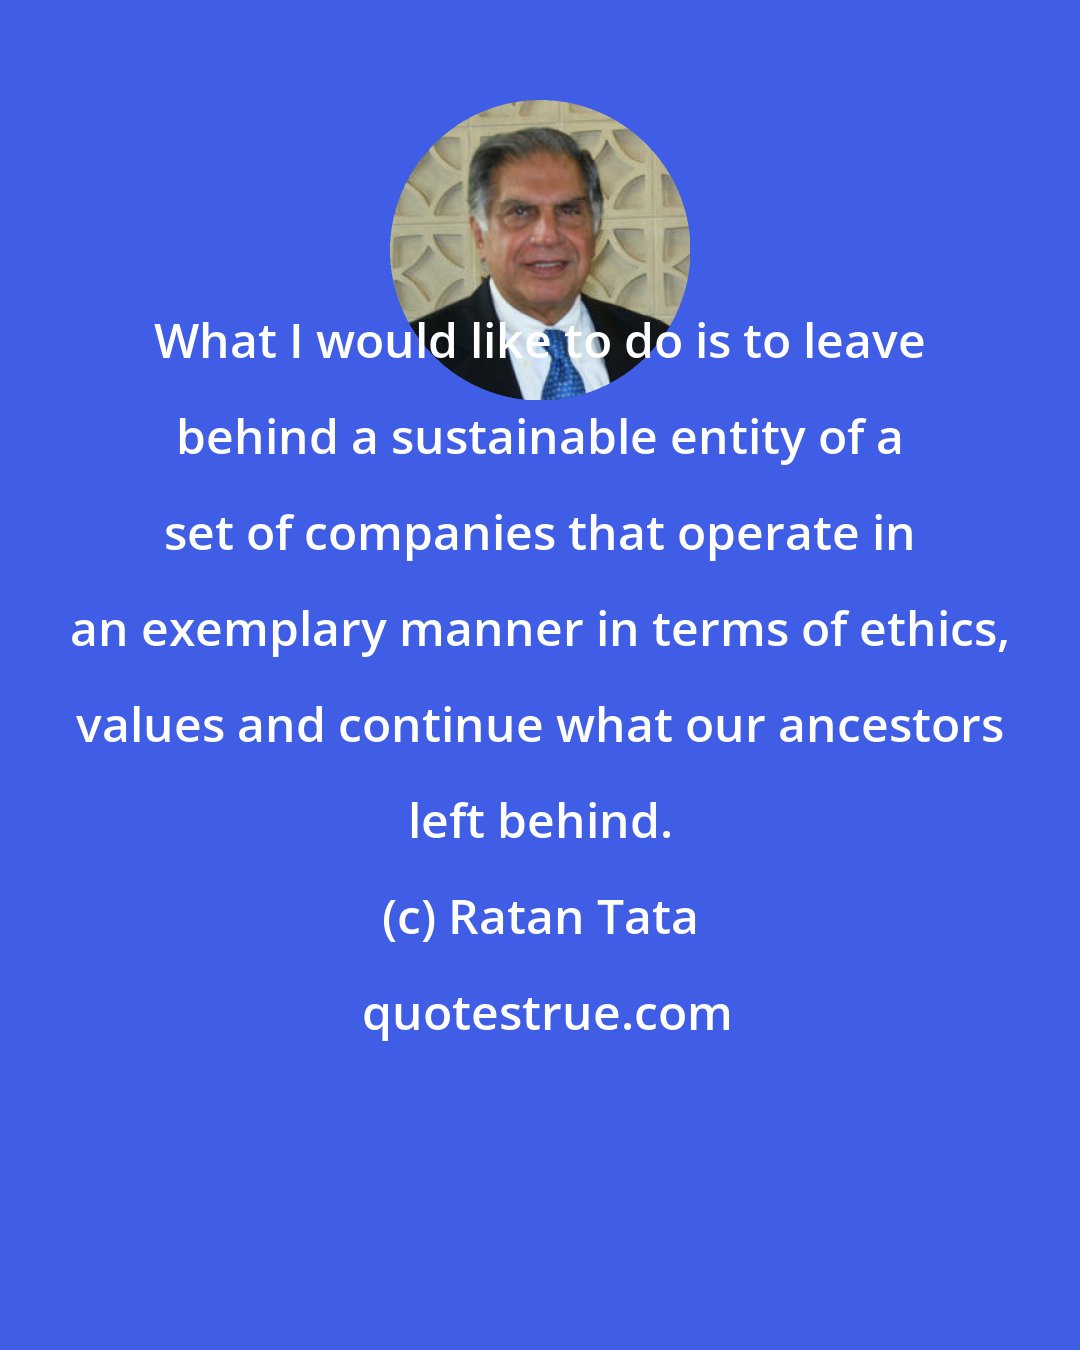 Ratan Tata: What I would like to do is to leave behind a sustainable entity of a set of companies that operate in an exemplary manner in terms of ethics, values and continue what our ancestors left behind.